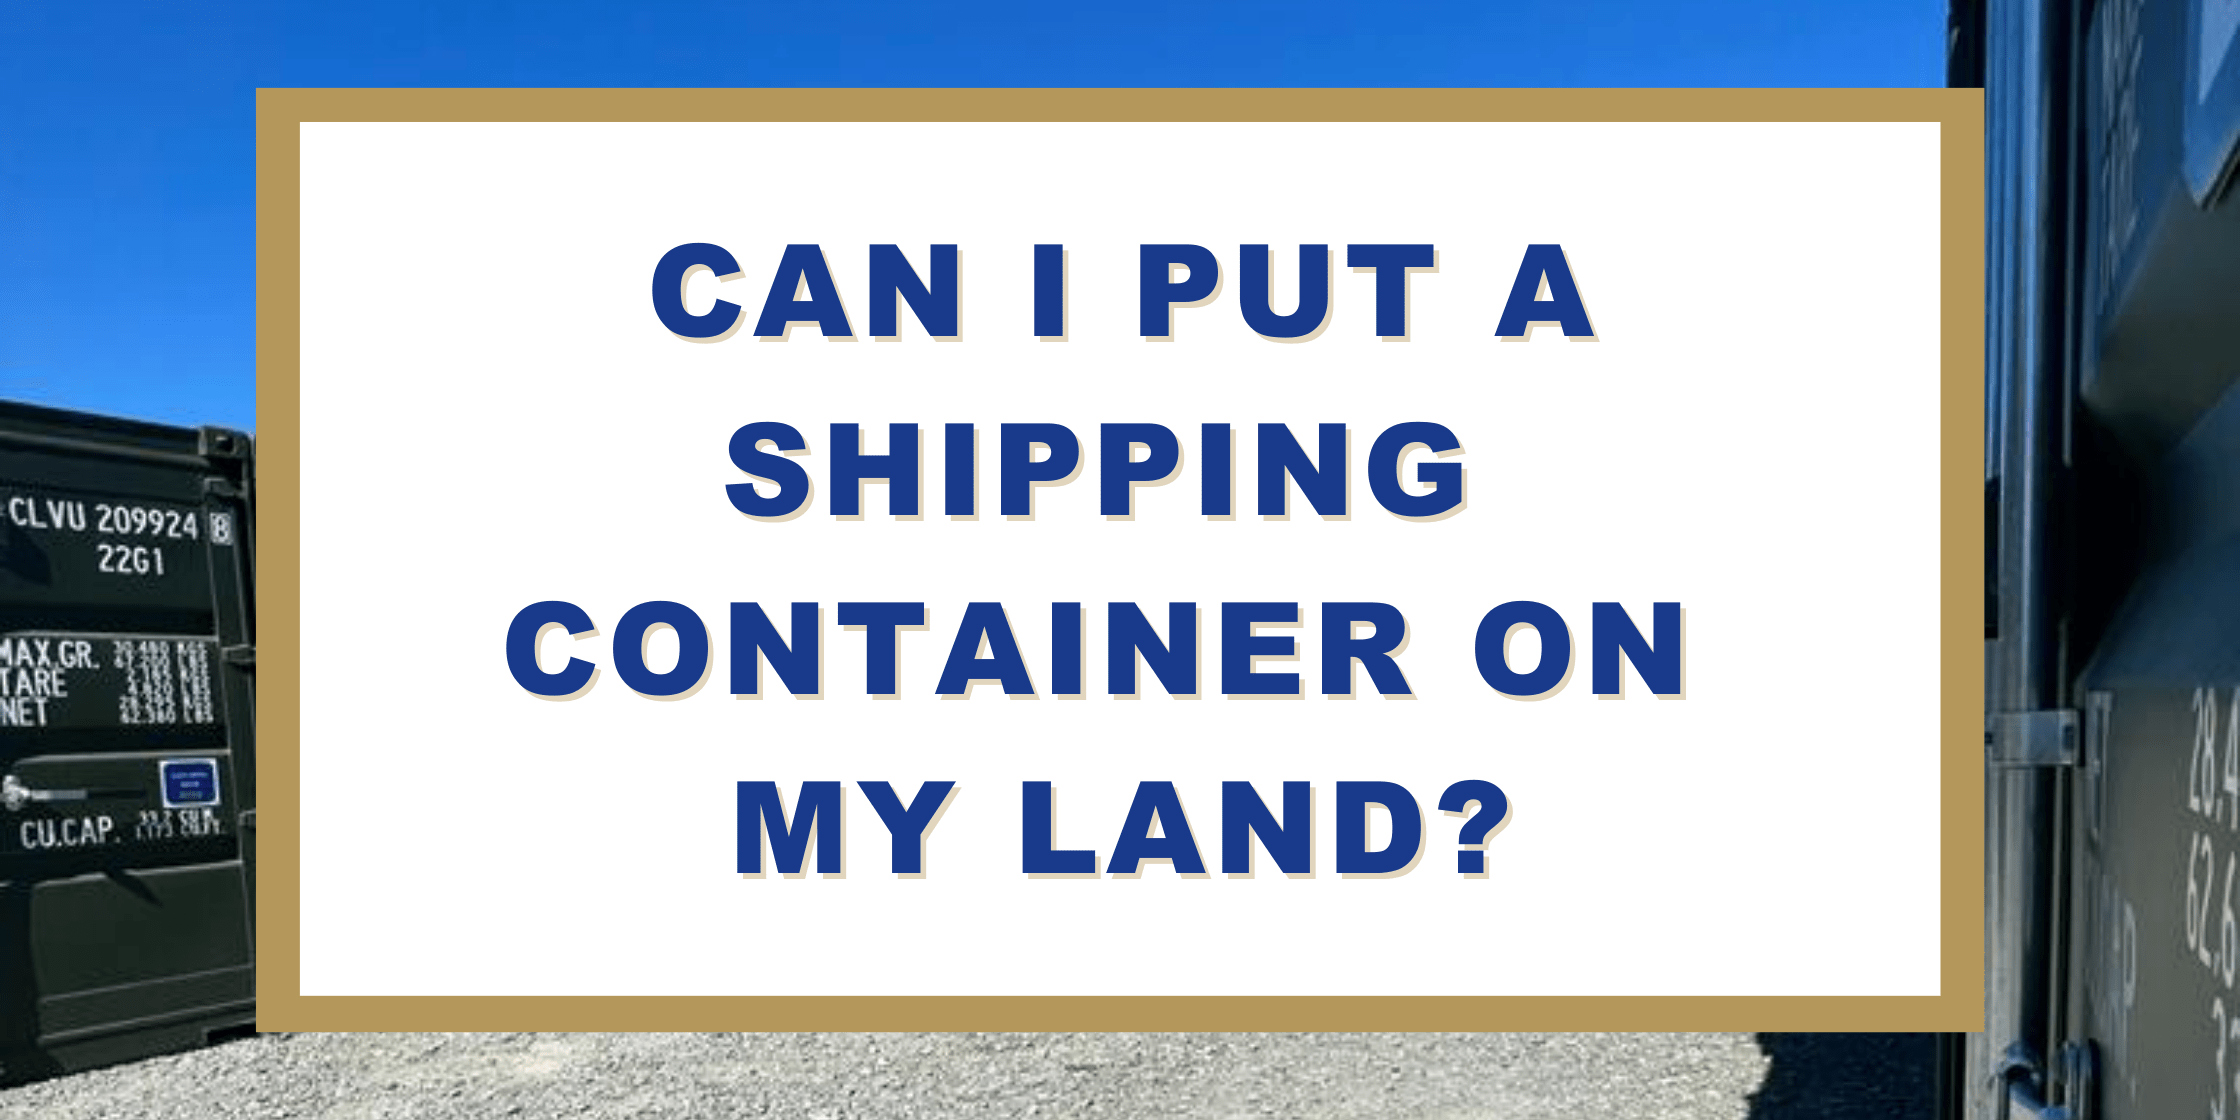 Can I put a shipping container on my land?